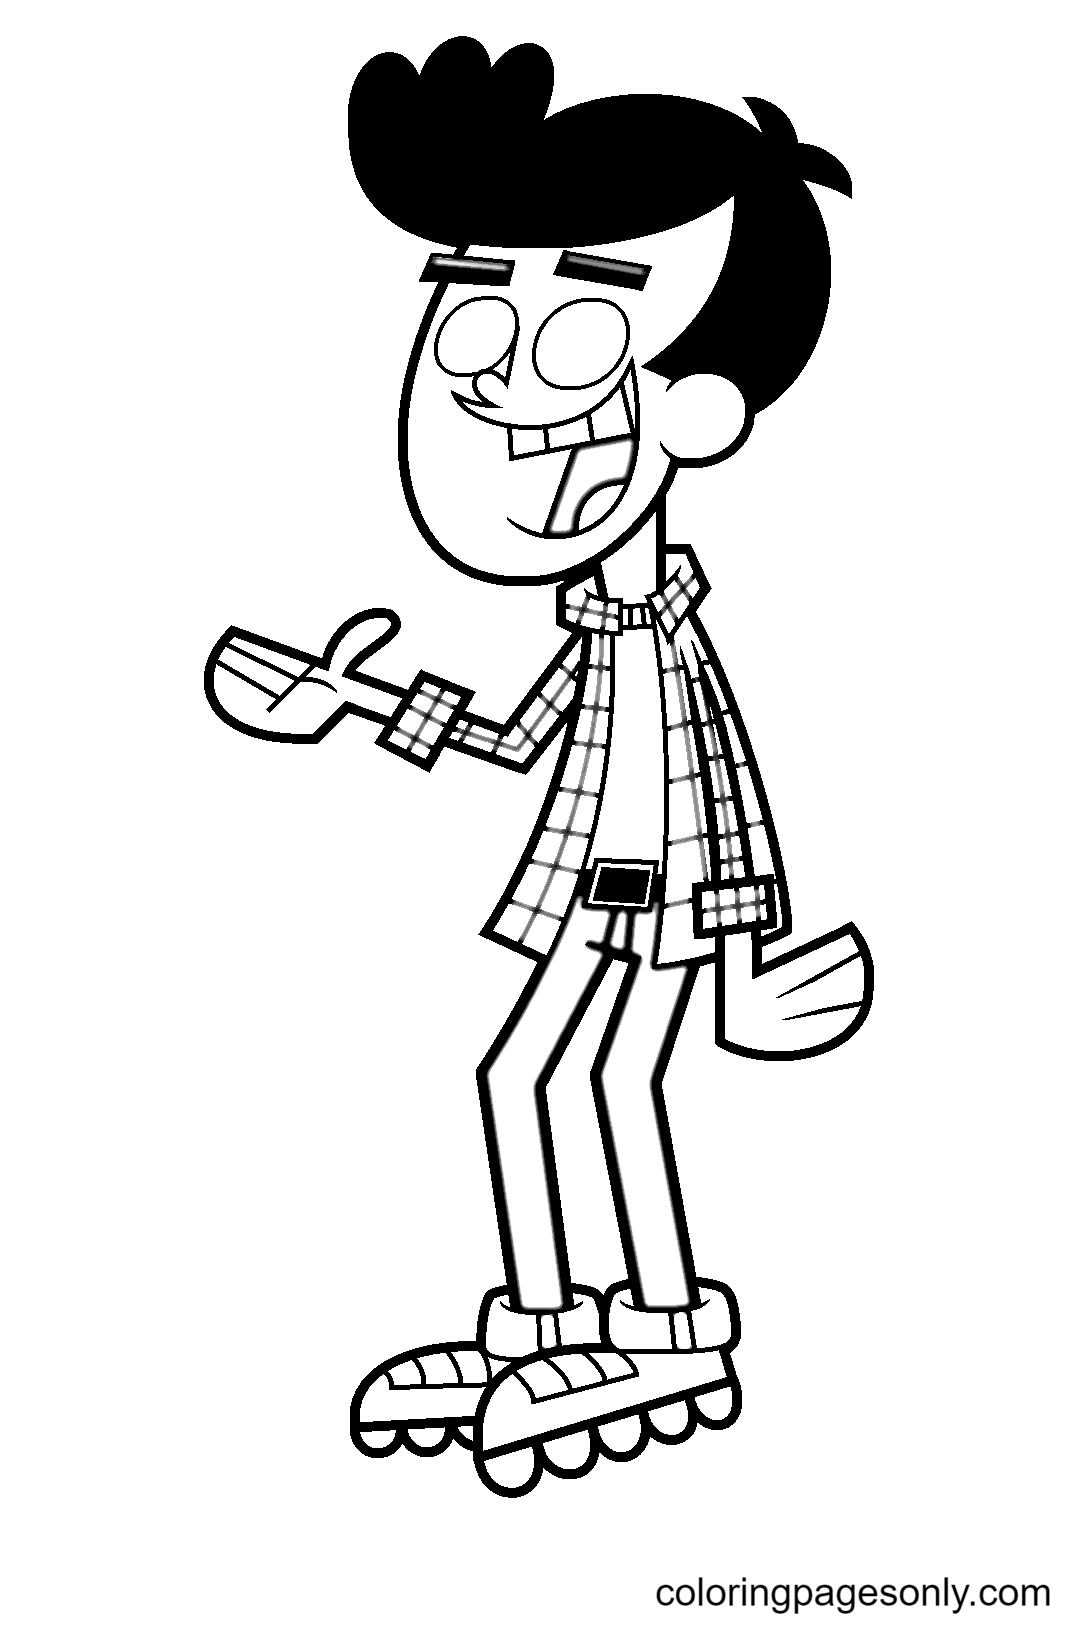 Bobby Coloring Page